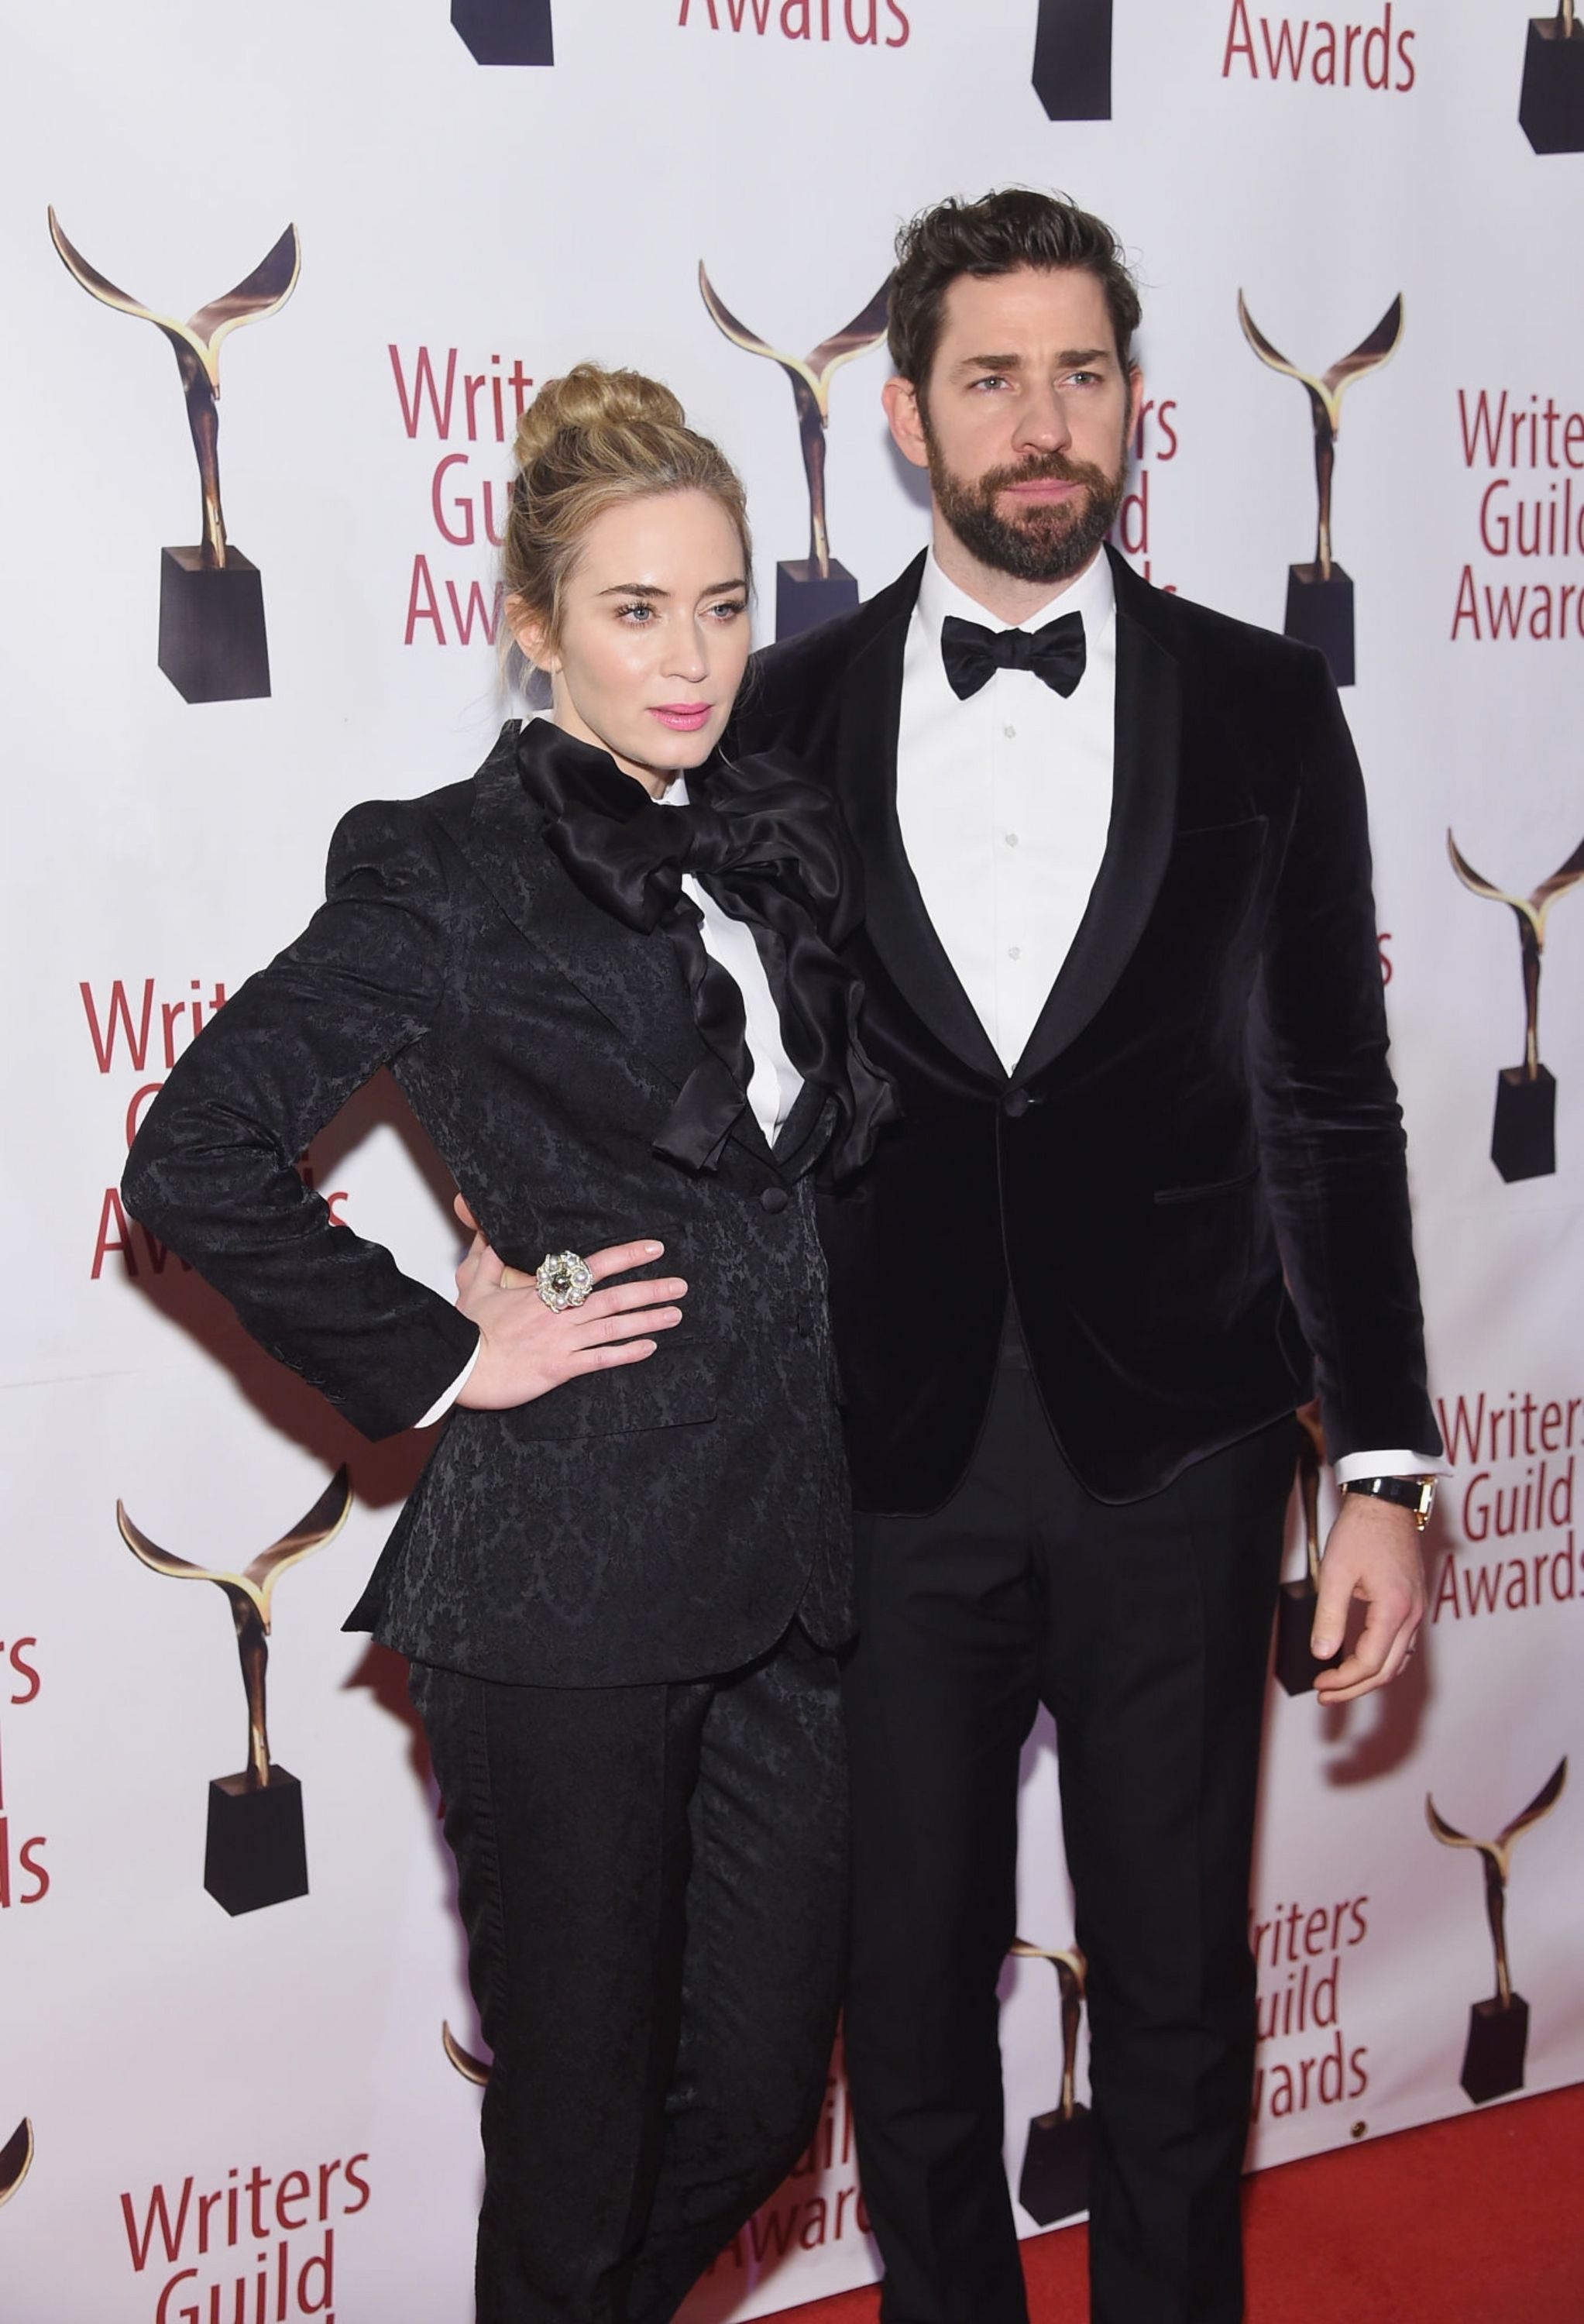 2019-02-17-71st-Annual-Writers-Guild-Awards-012.jpg